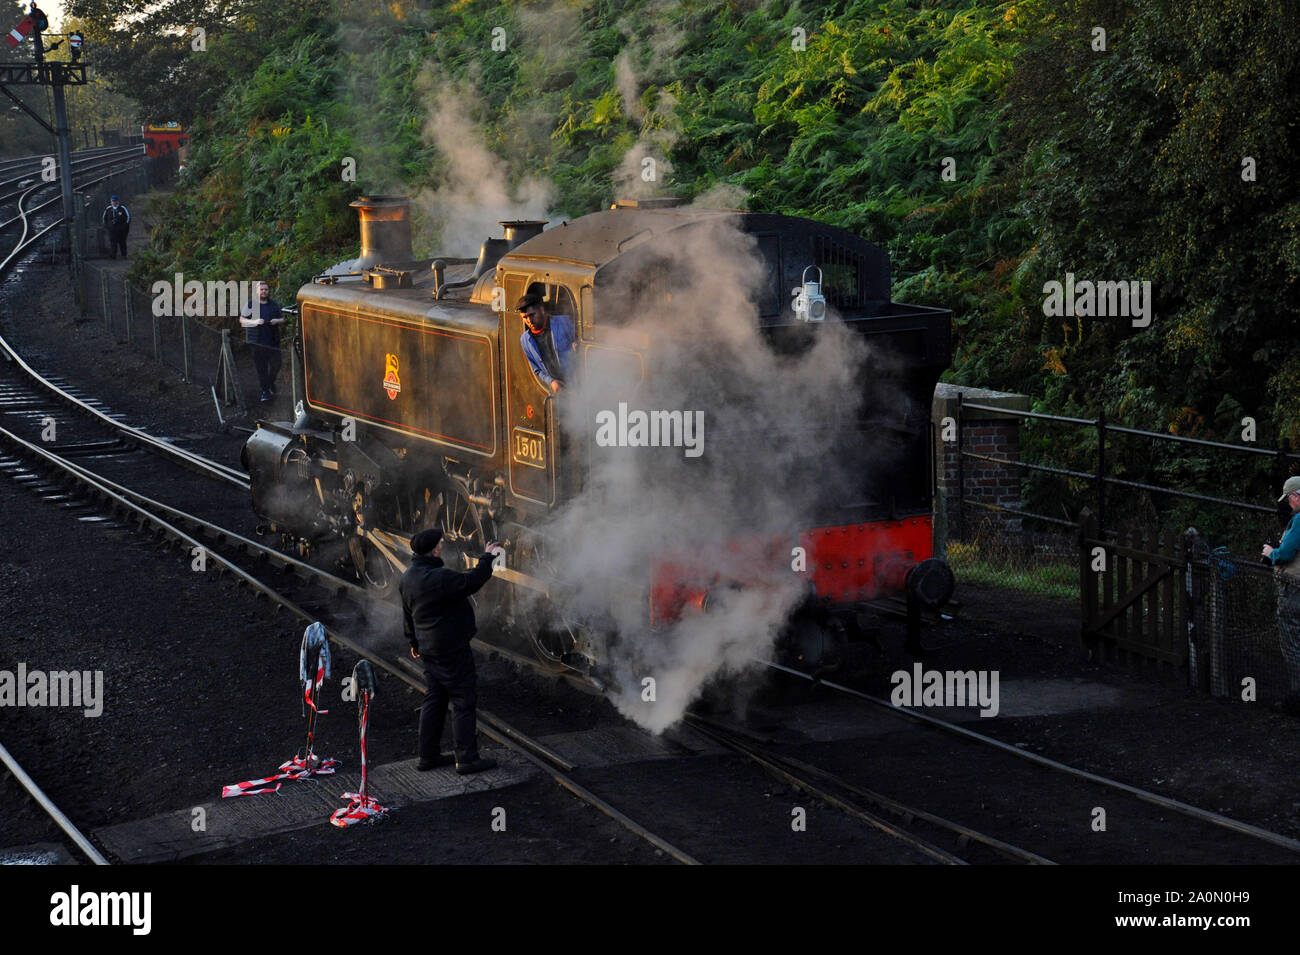 Bridgnorth, Shropshire, UK. 21 September 2019. Volunteer crews start at 4am to prepare steam engines for the UK's biggest steam gala, at The Severn Valley Railway. The event features up to 12 locomotives in steam and all night running along the 16 mile heritage railway. G.P. Essex / Alamy Live News Stock Photo